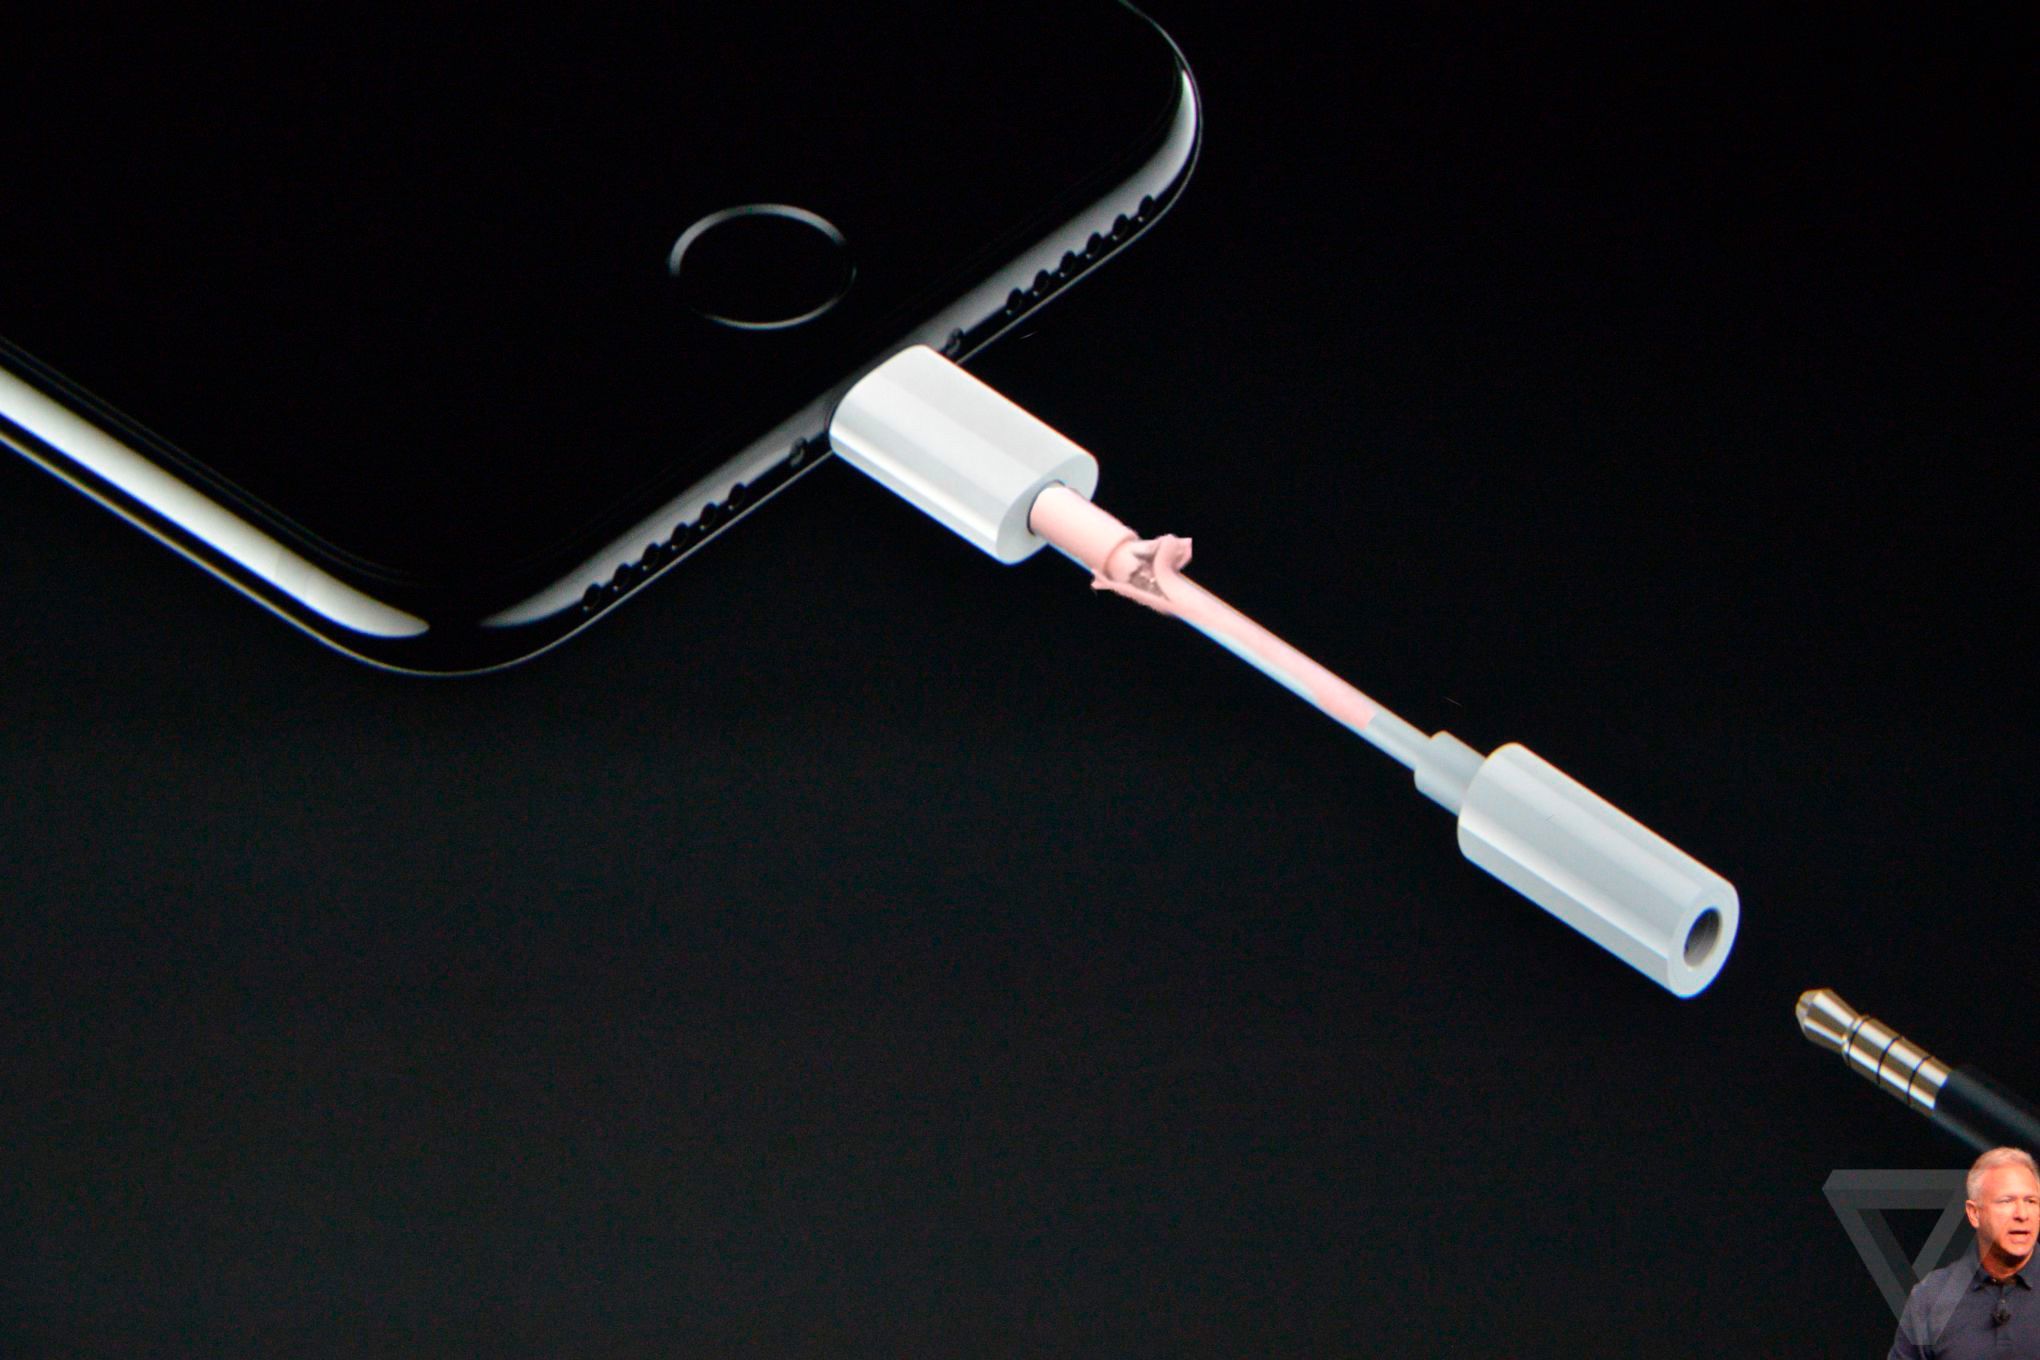 Introducing, the new iPhone 7 headphone adapter